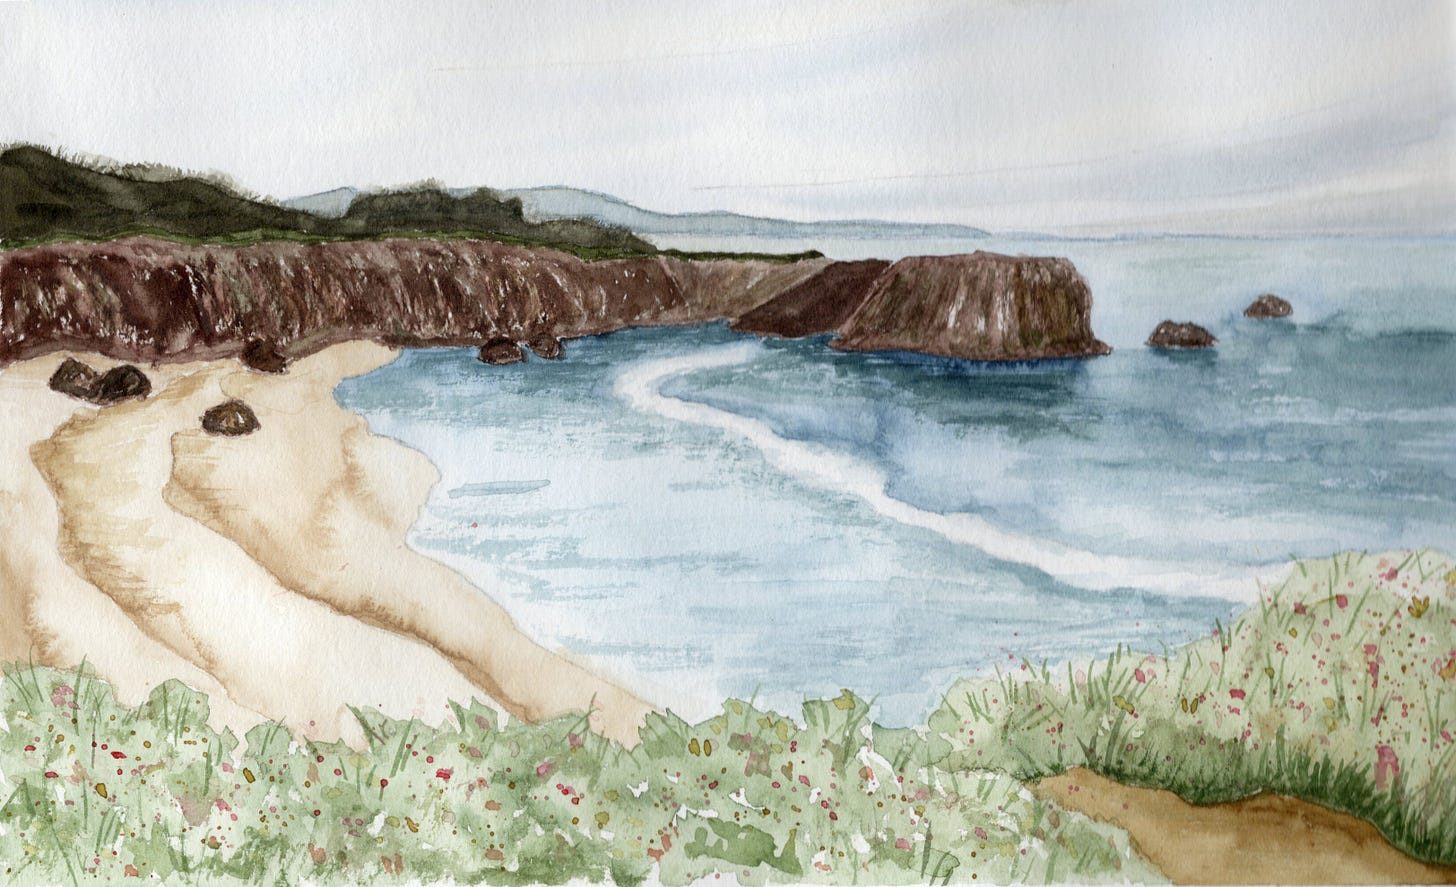 a watercolor painting of a California coast line, with plants in the foreground, sandy beach, and brown cliffs